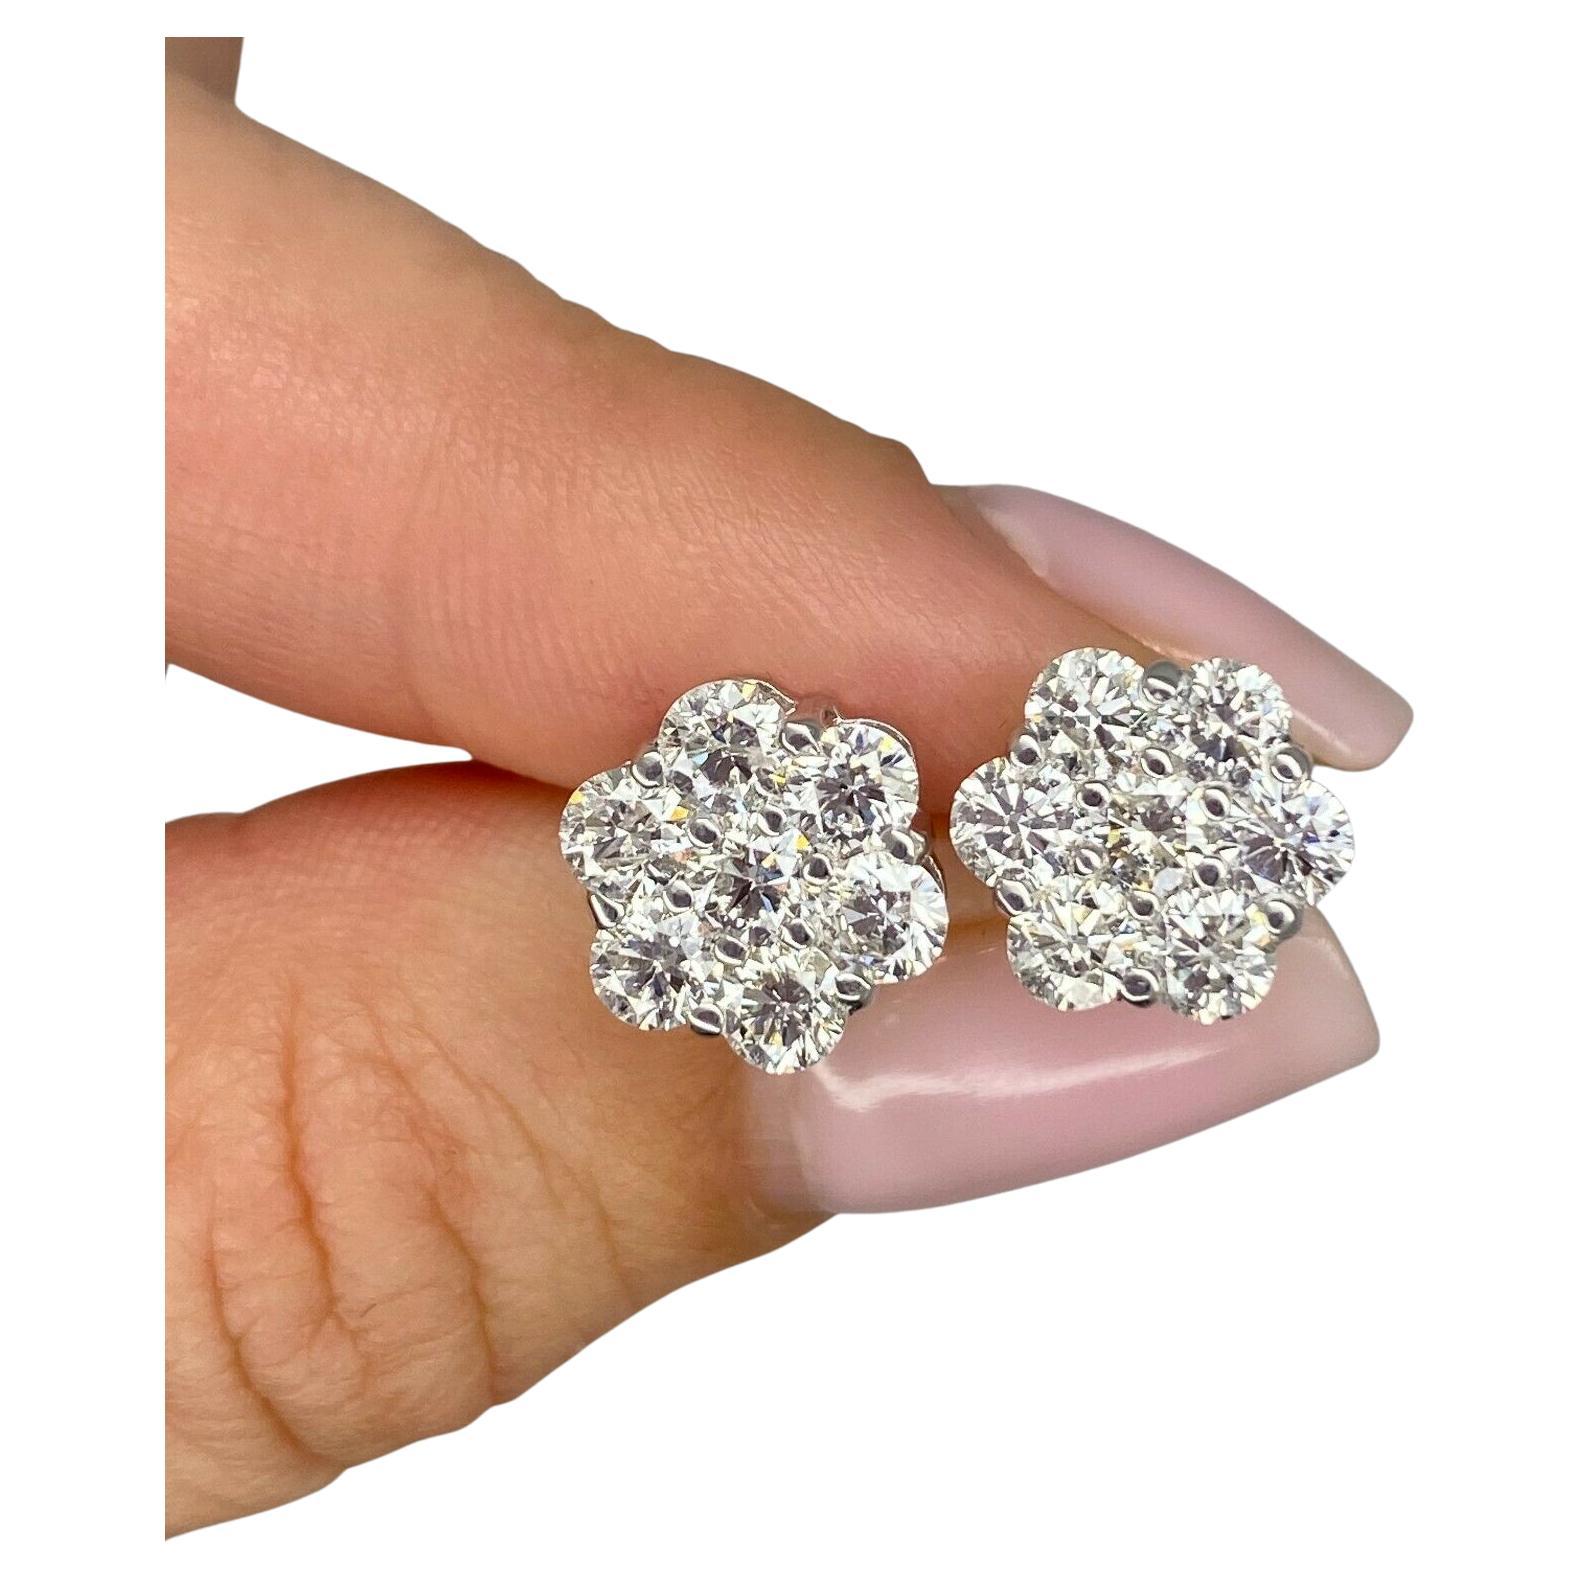 14k White Gold Diamond Cluster Earrings Weighing 2.10 Carats